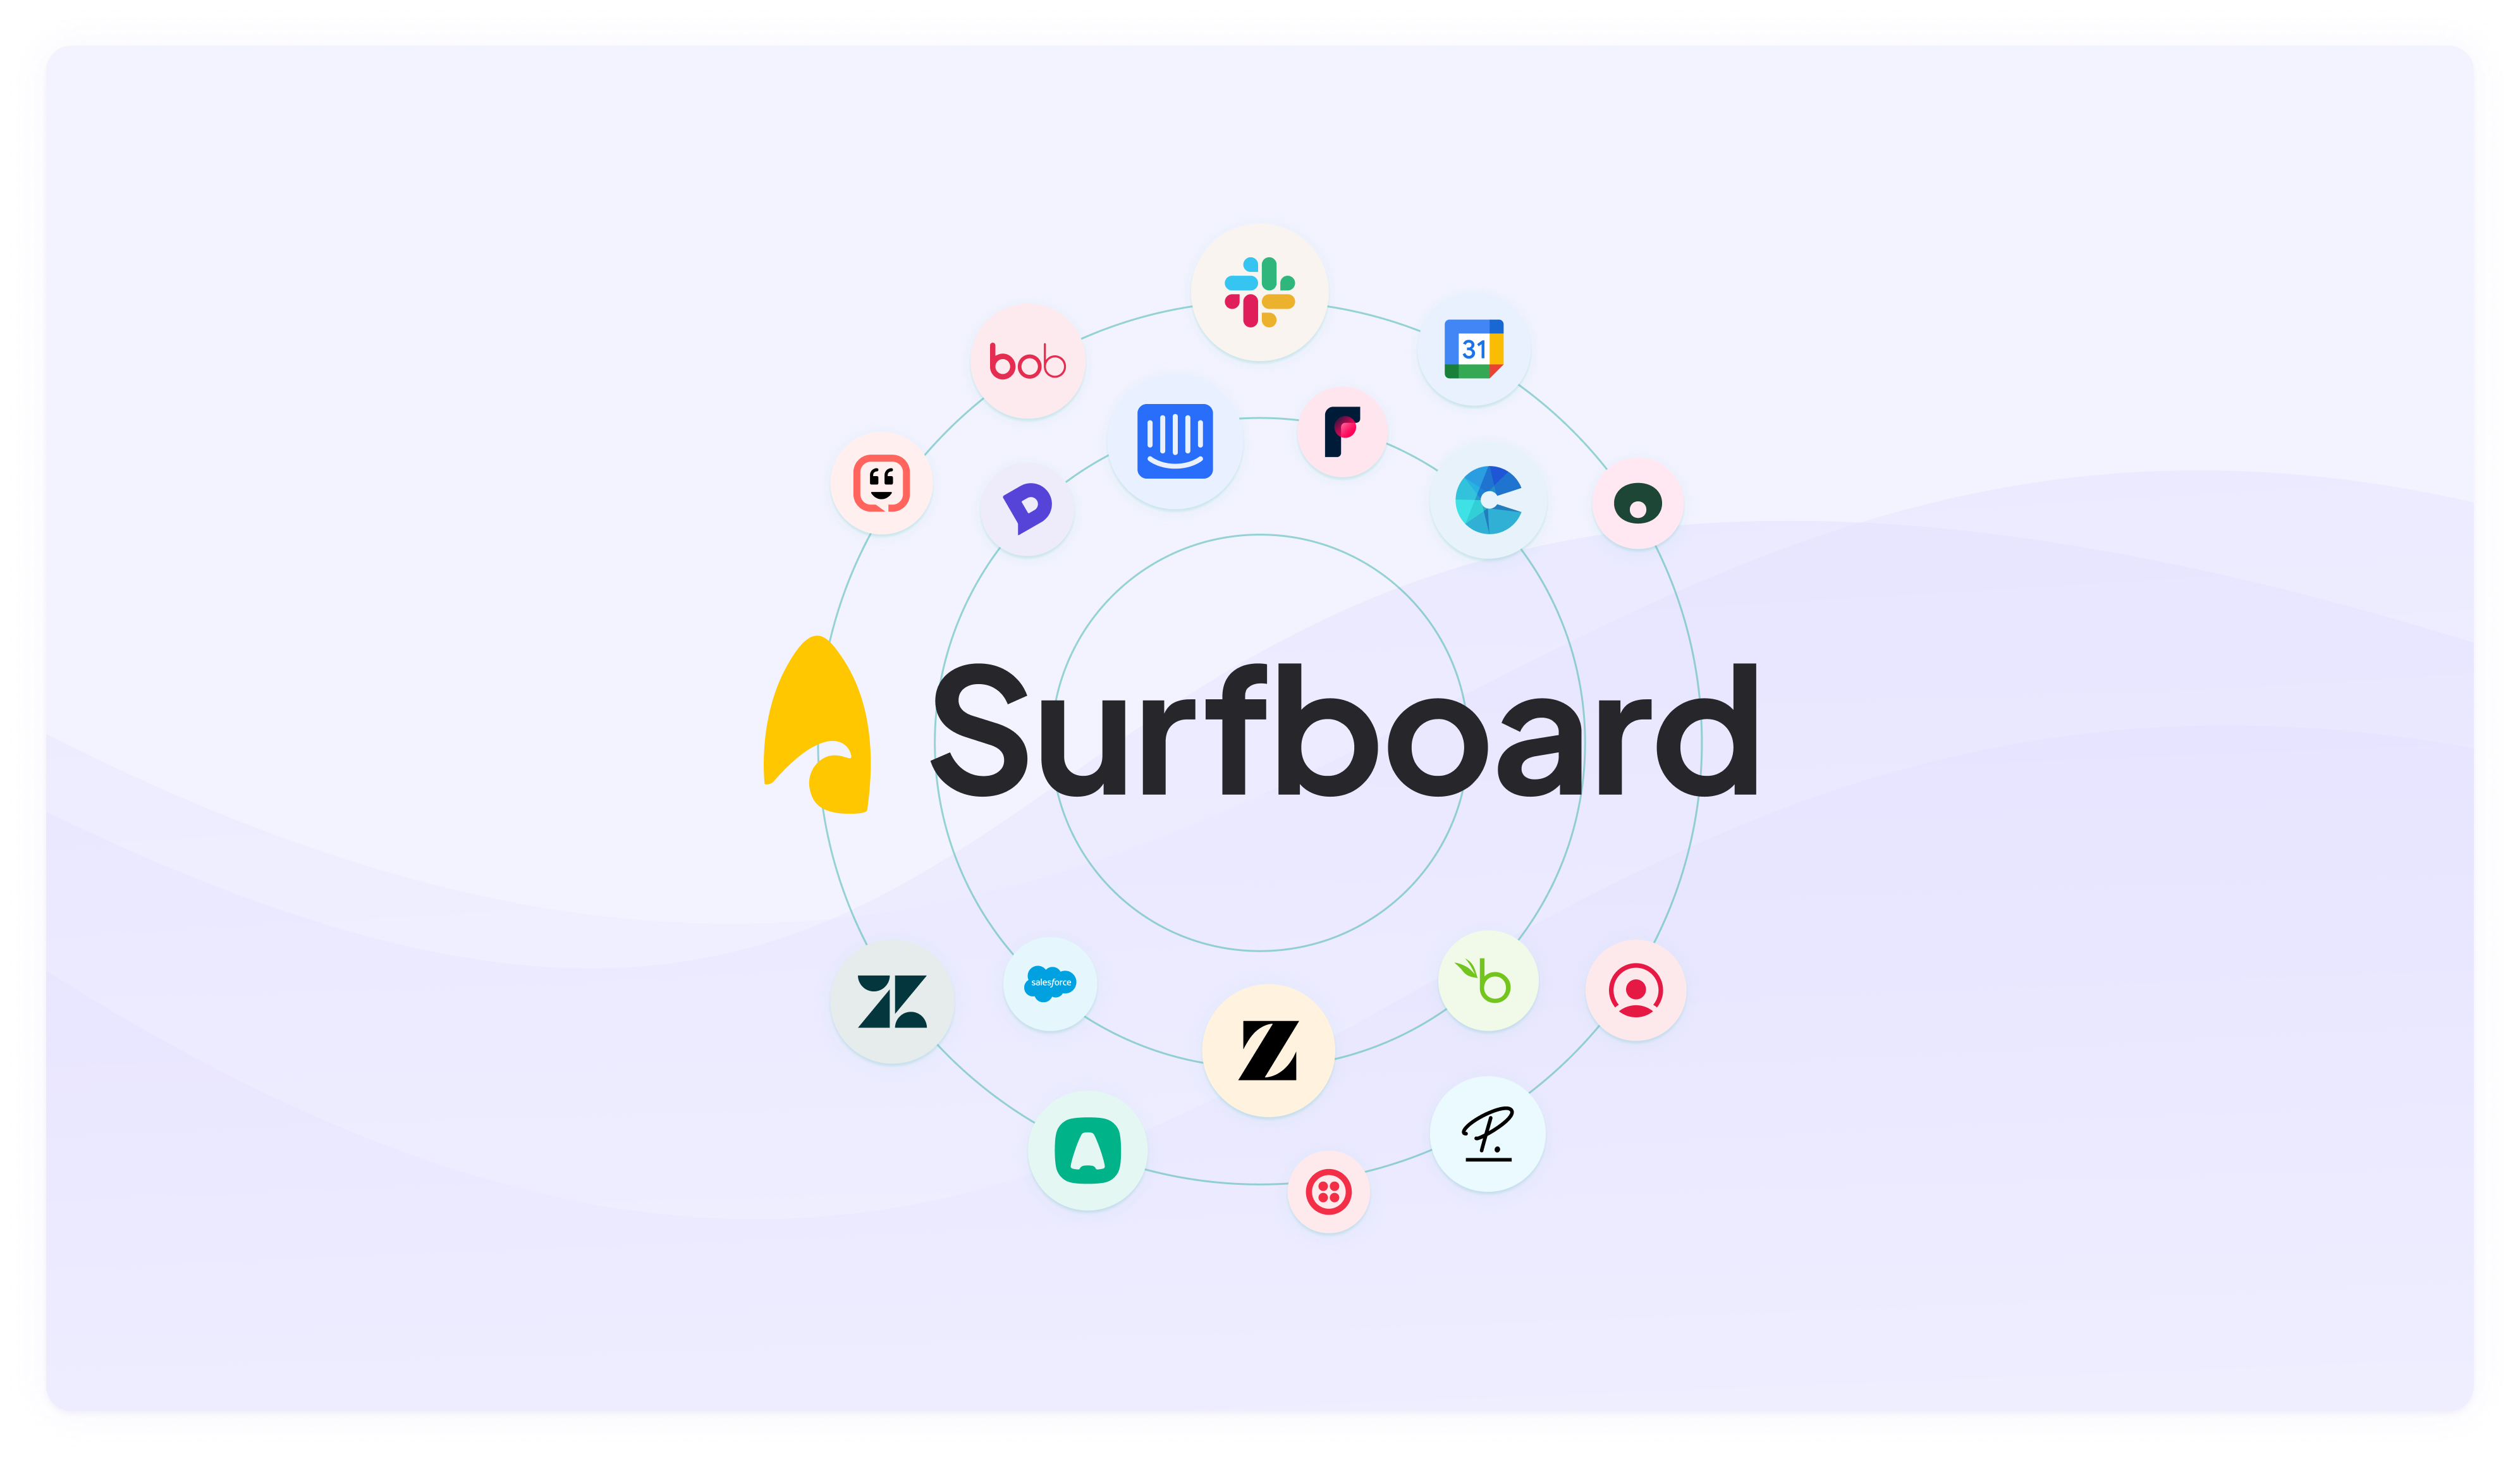 You don’t need any support from engineering to get started with Surfboard.  Surfboard seamlessly connects with your existing systems like HRIS, payroll & billing, CRM, ticketing, and time off, making it the single source of truth for your support team.